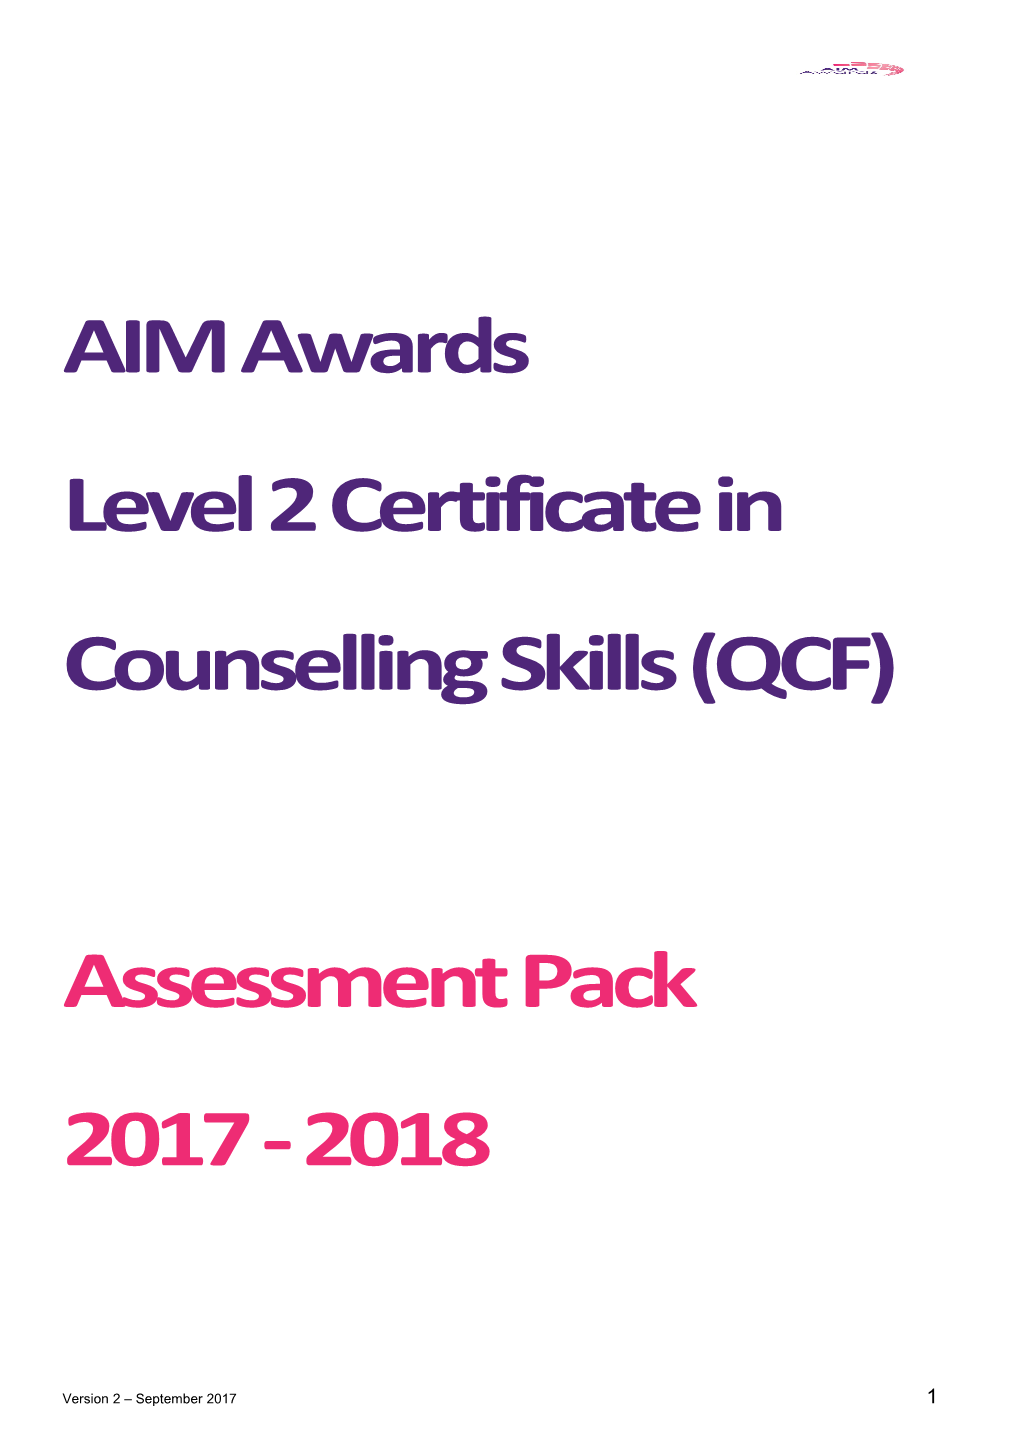 Level 2 Certificate in Counselling Skills (QCF)